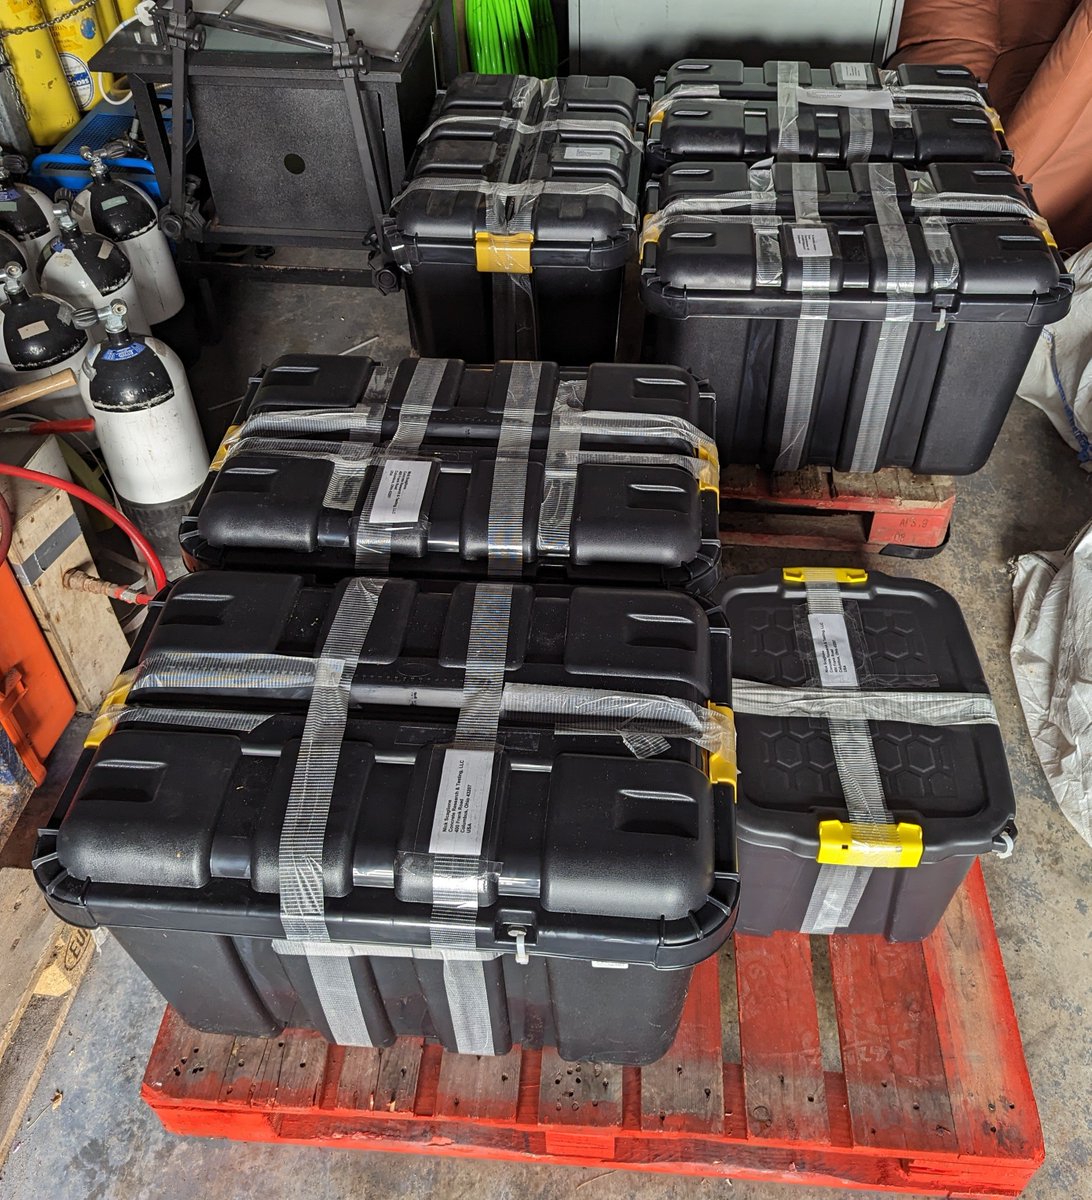 So that's a wrap! 400 kg of defective Donegal concrete blocks & cores from the inner & outer leaf & the rising walls. Importantly we now have foundation concrete samples. All packed & shipped to @Empa_CH, @LavalUniversity, @UConn & Concrete Research Testing LLC for analysis 👍